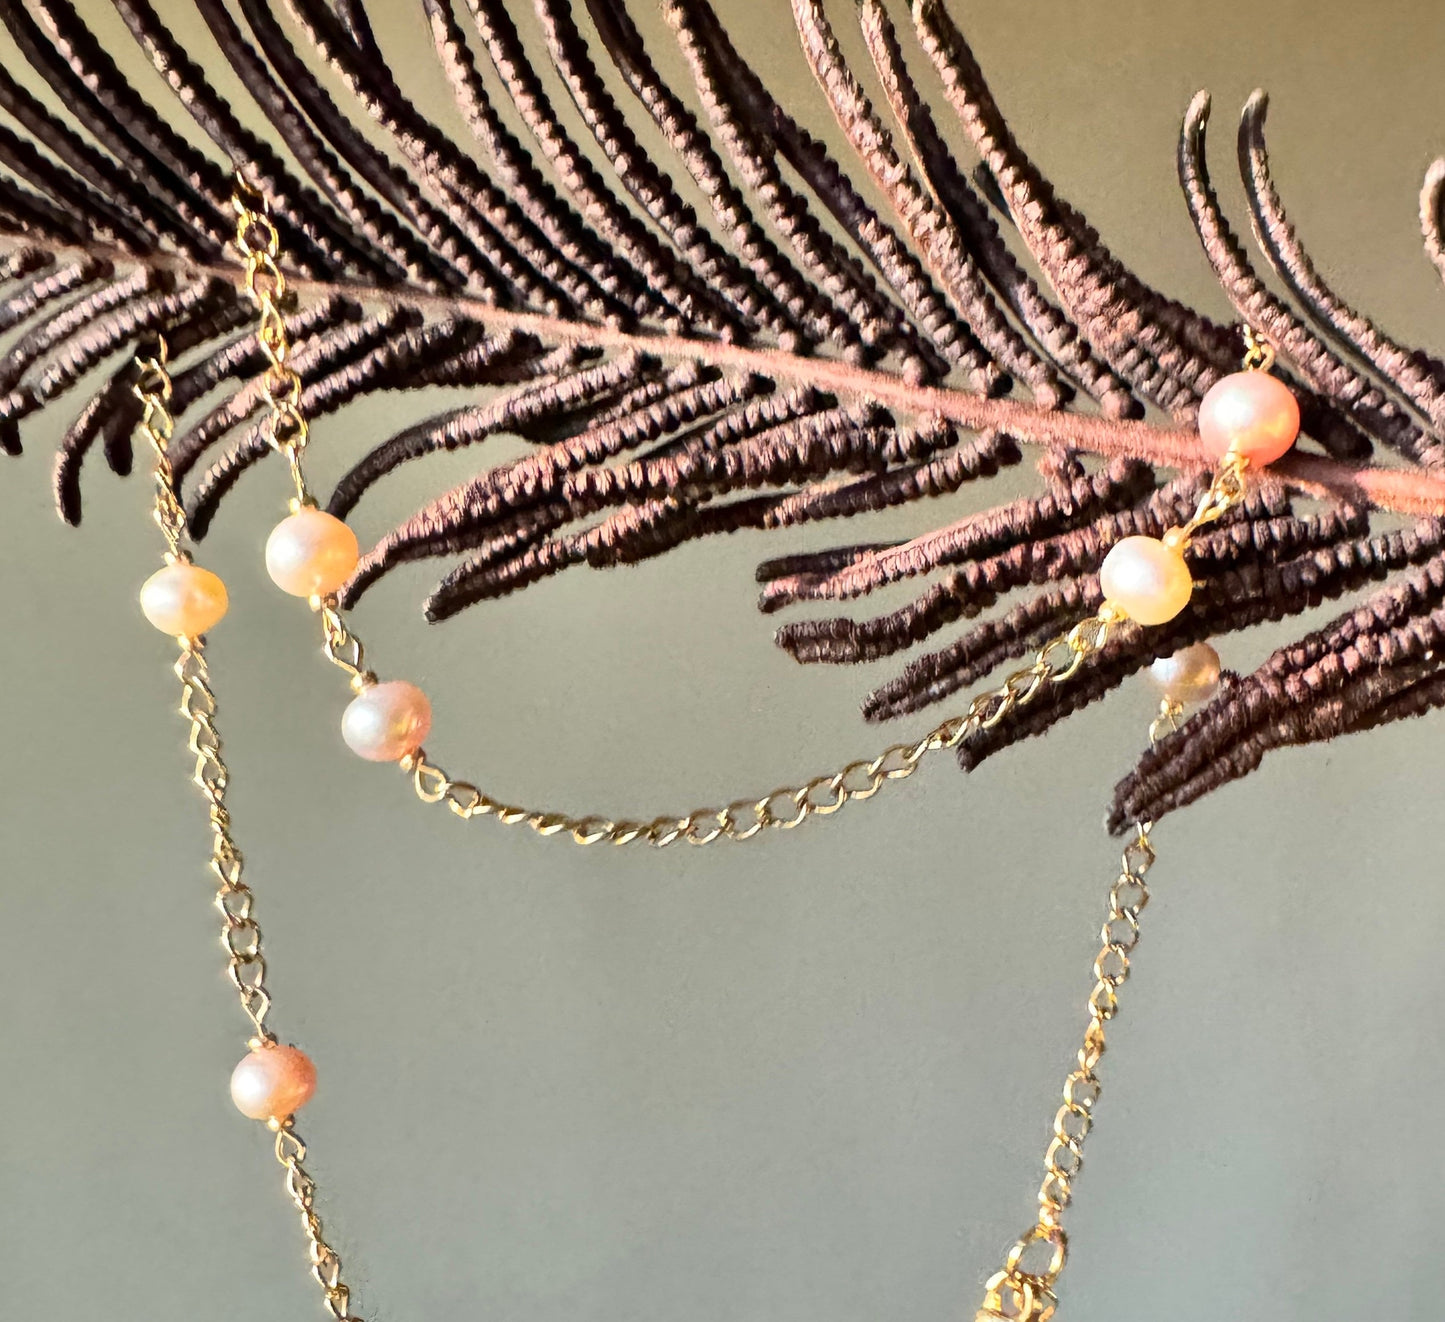 Ivory and Pink Pearls on Gold Chain Necklace - Real Freshwater Pearls